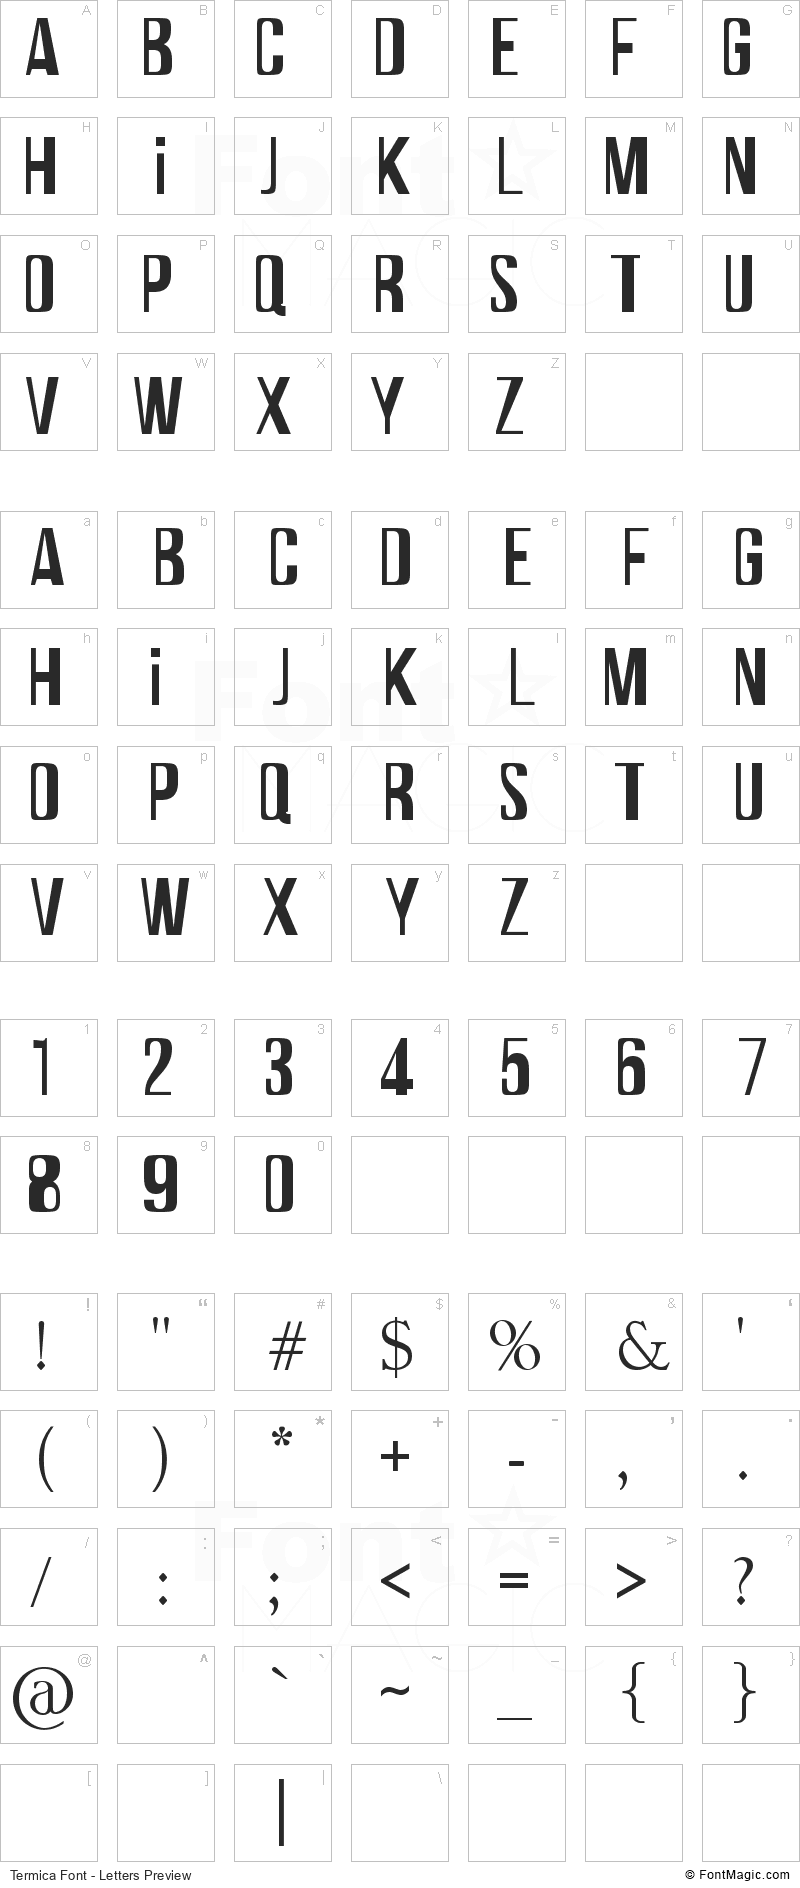 Termica Font - All Latters Preview Chart